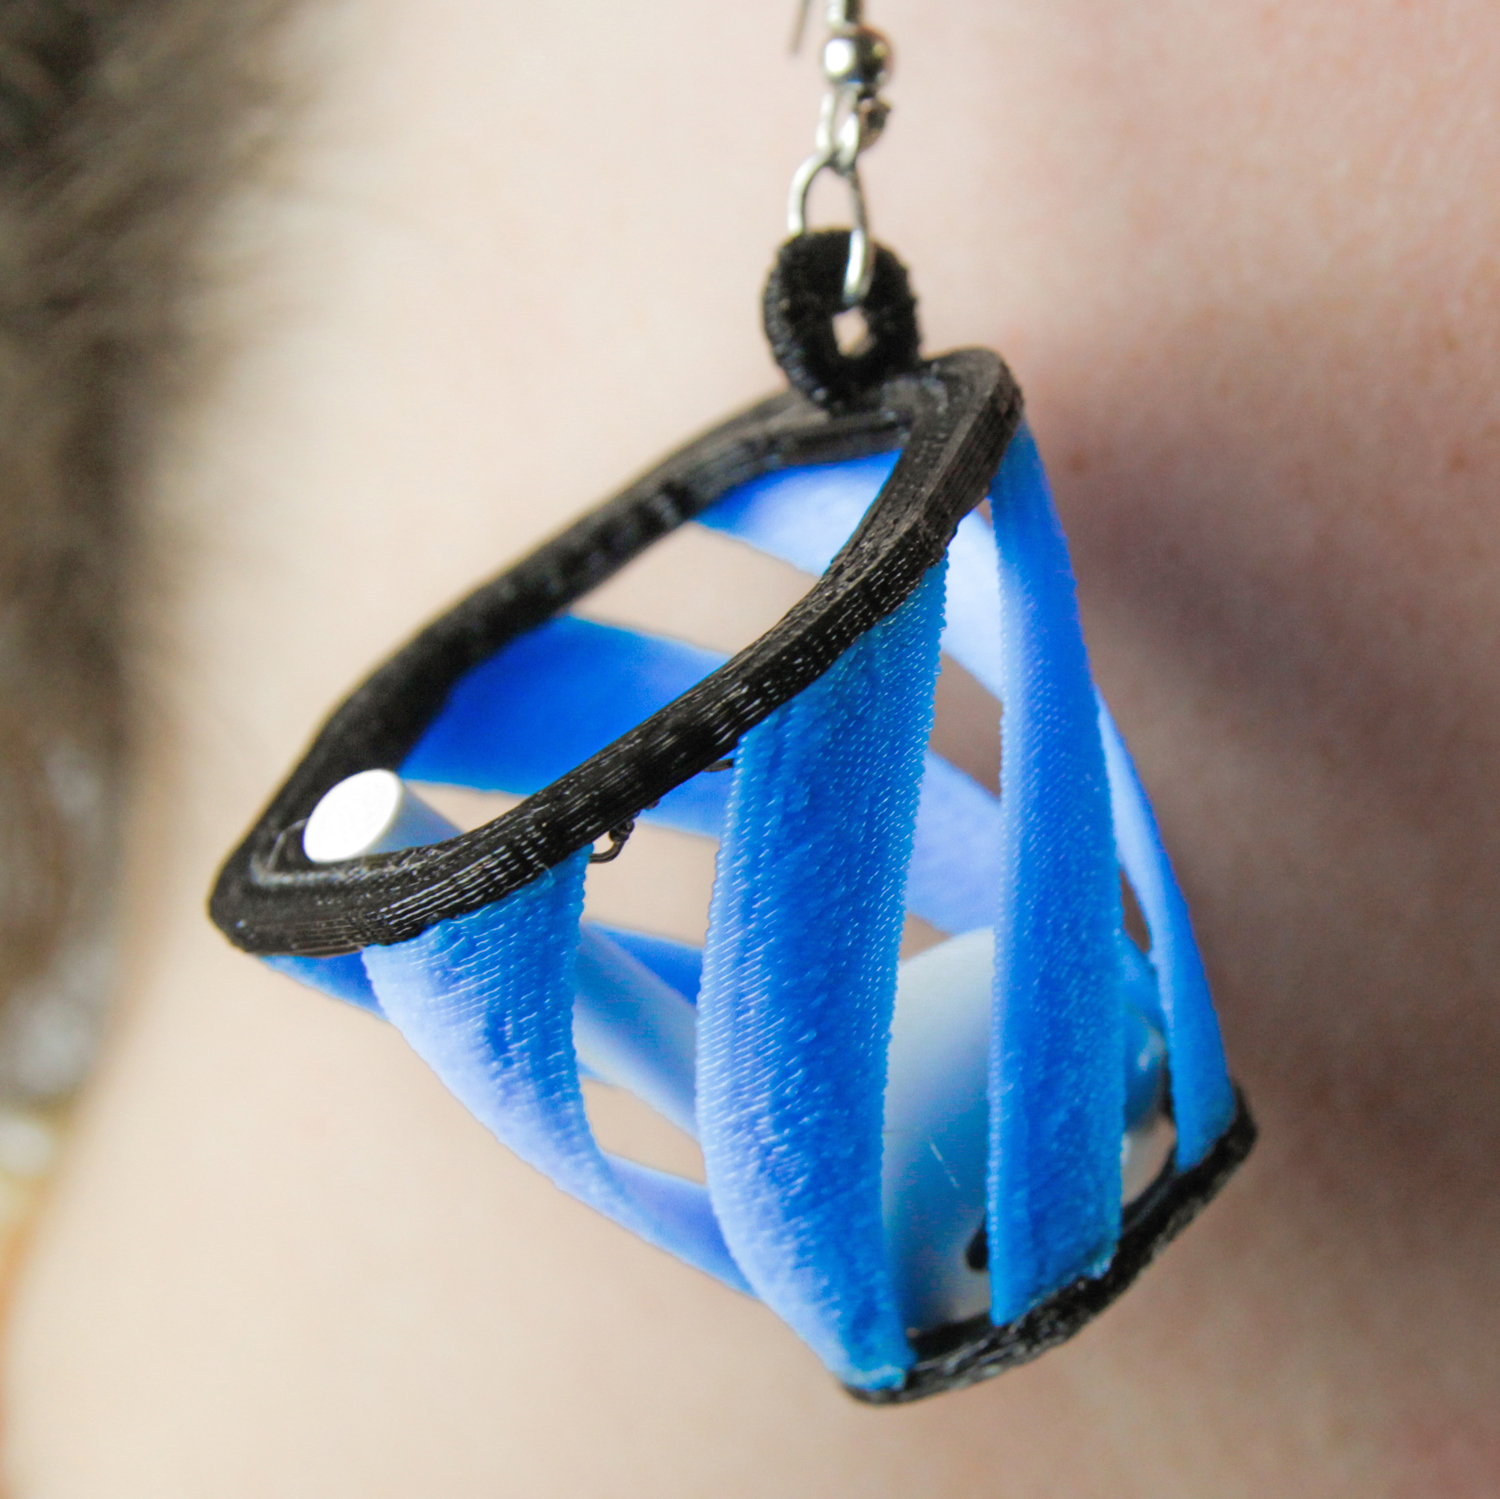 These 3D-Printed Earrings Catch Apple’s AirPods When They Fall Out